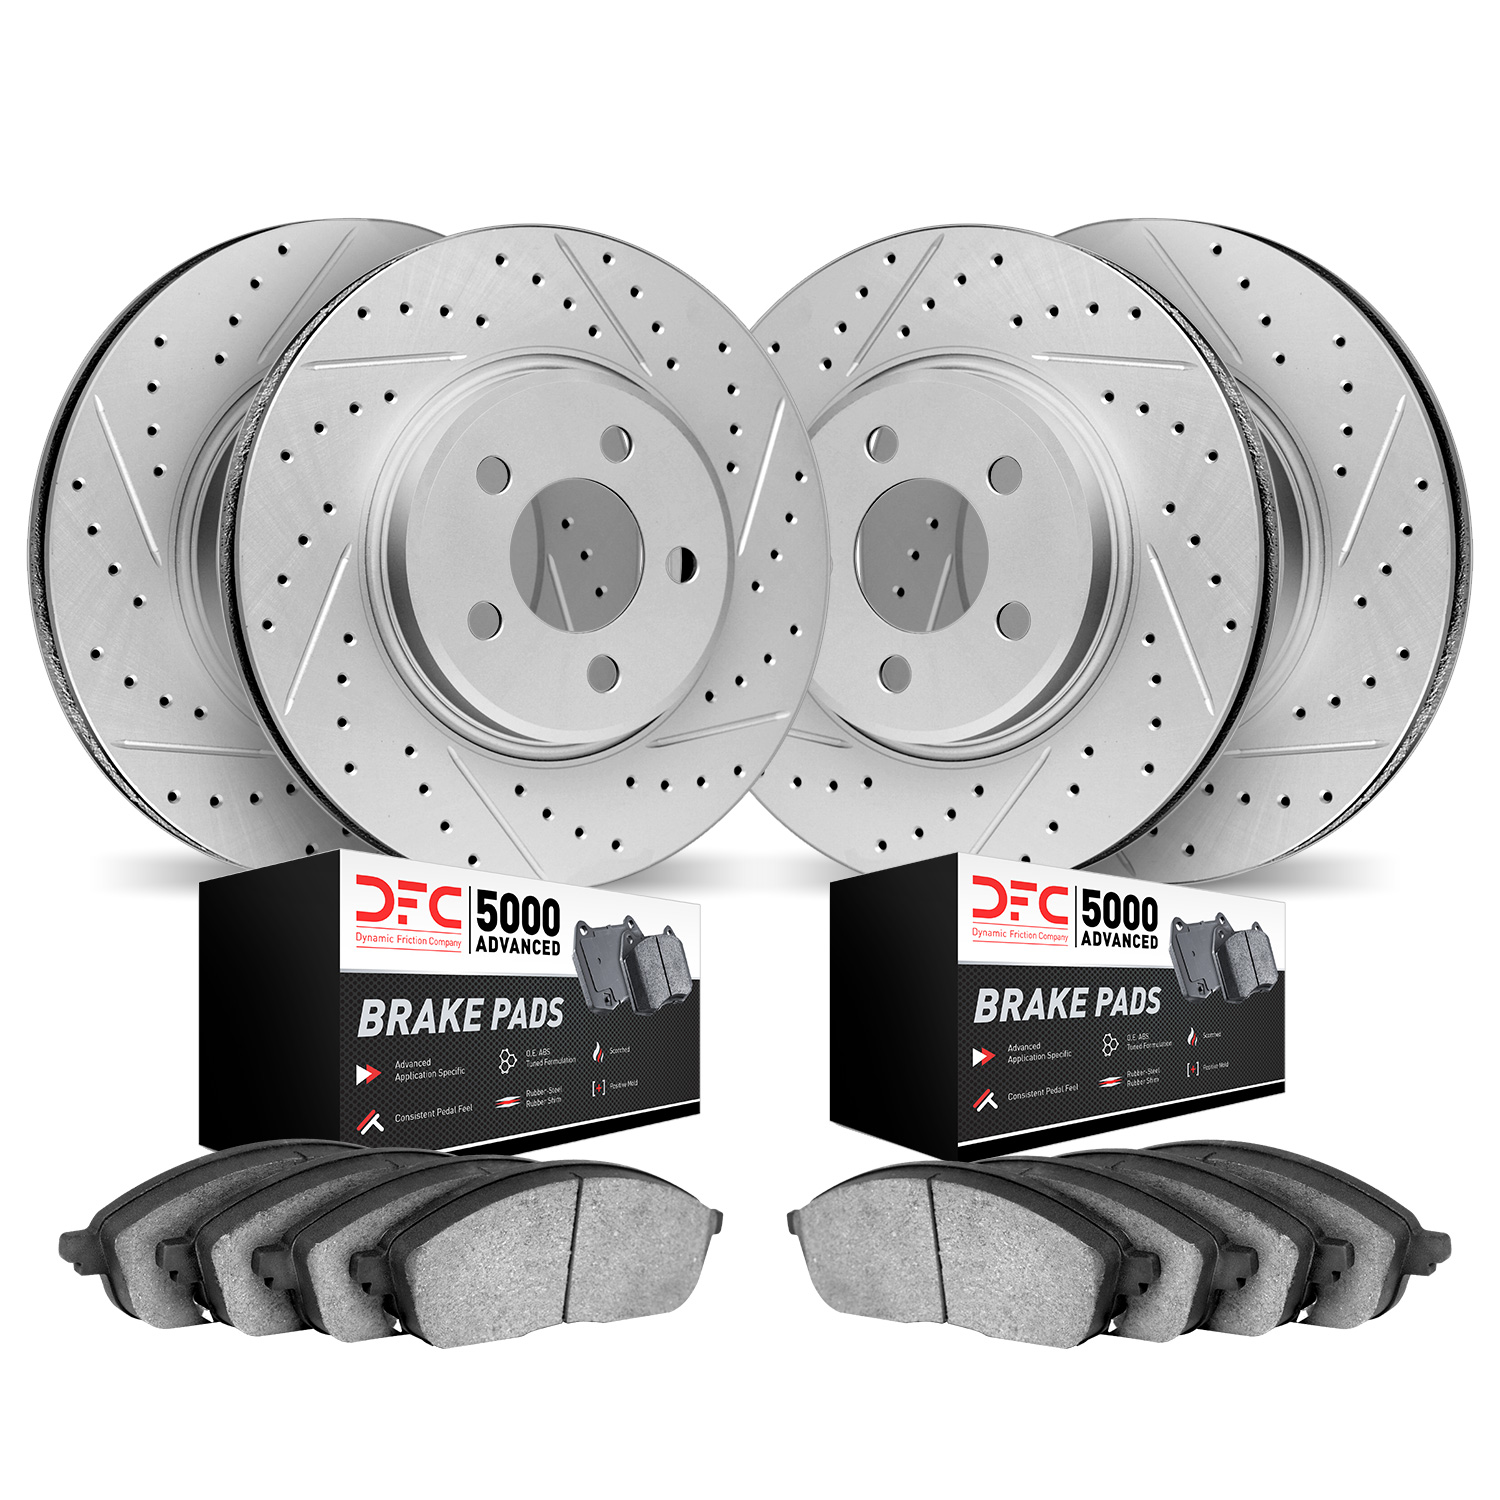 2504-67064 Geoperformance Drilled/Slotted Rotors w/5000 Advanced Brake Pads Kit, 2003-2011 Infiniti/Nissan, Position: Front and